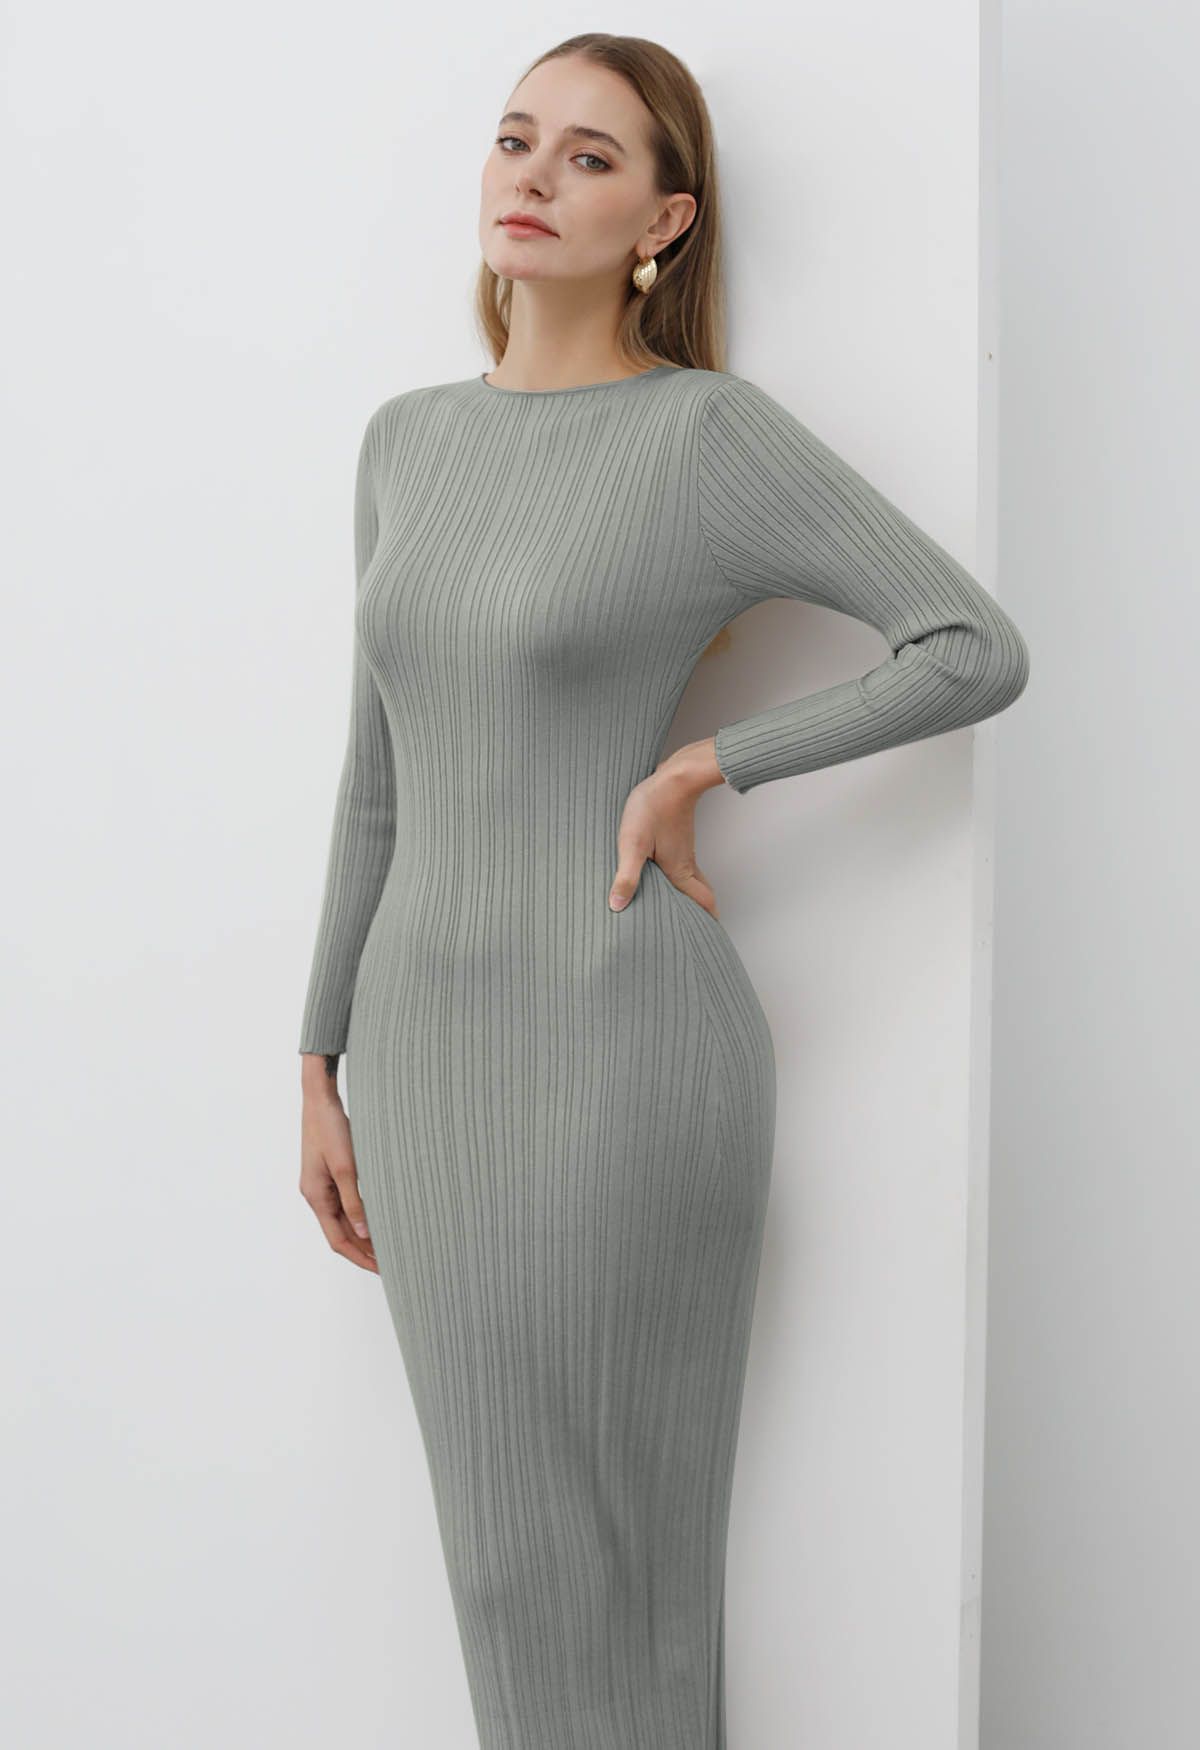 Stripe Texture Fitted Knit Maxi Dress in Pea Green - Retro, Indie and ...